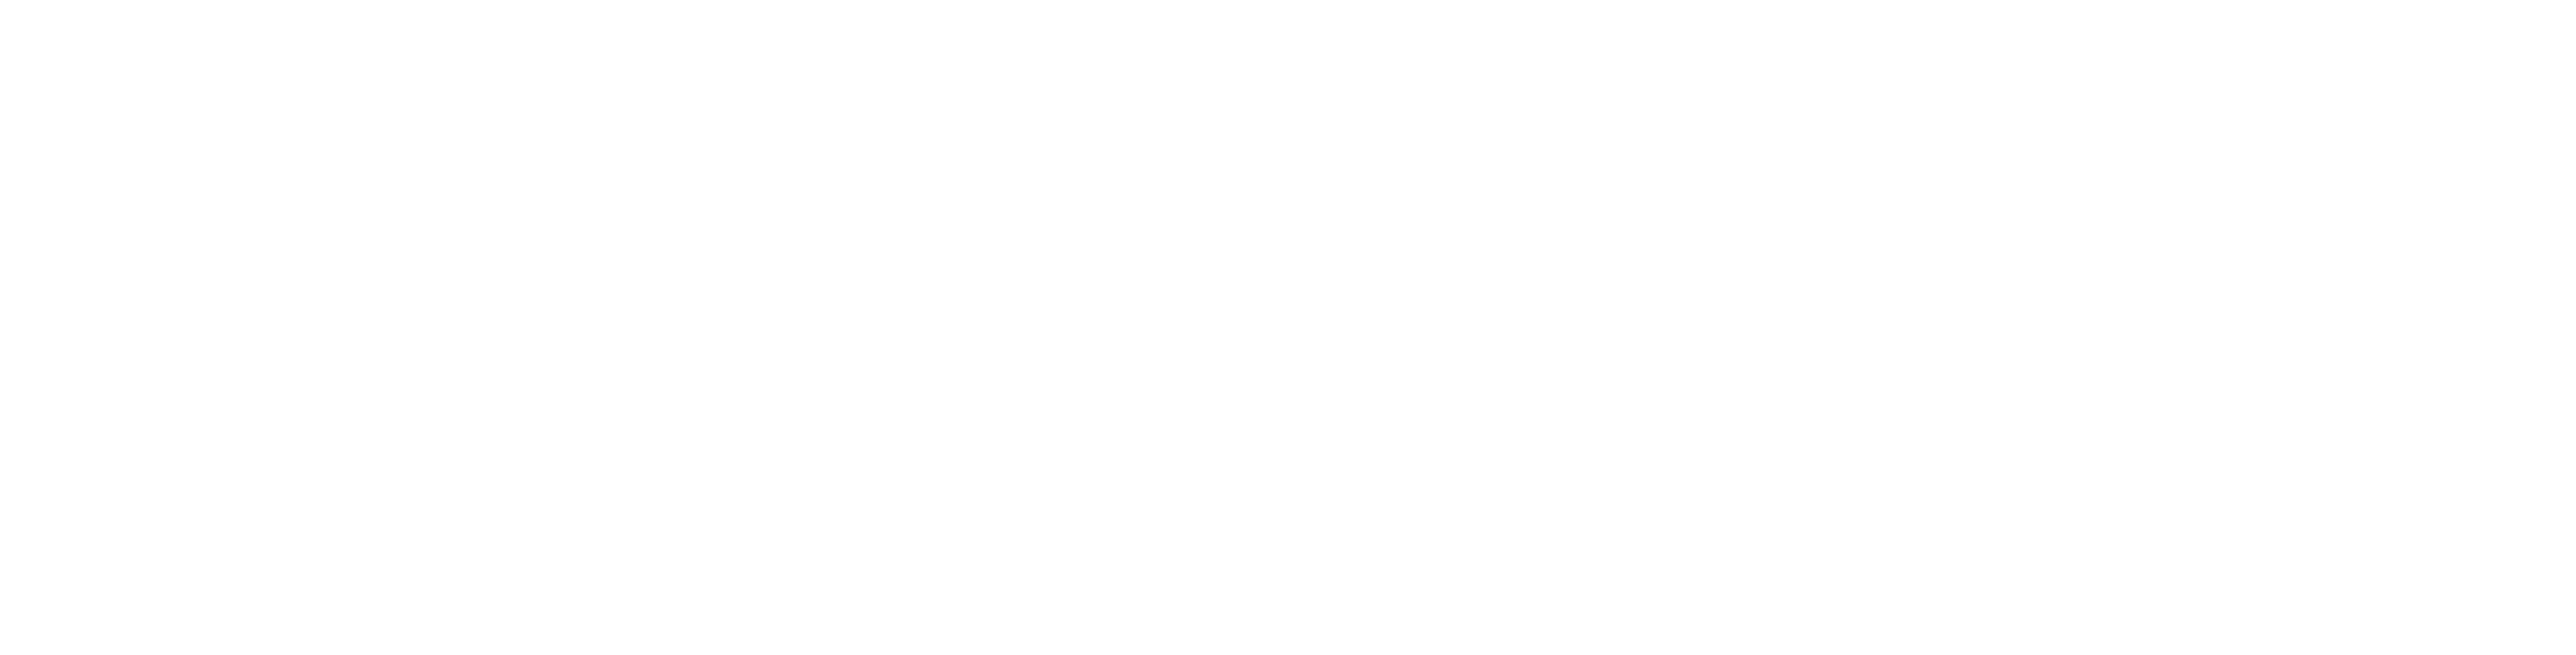 Partners in Education